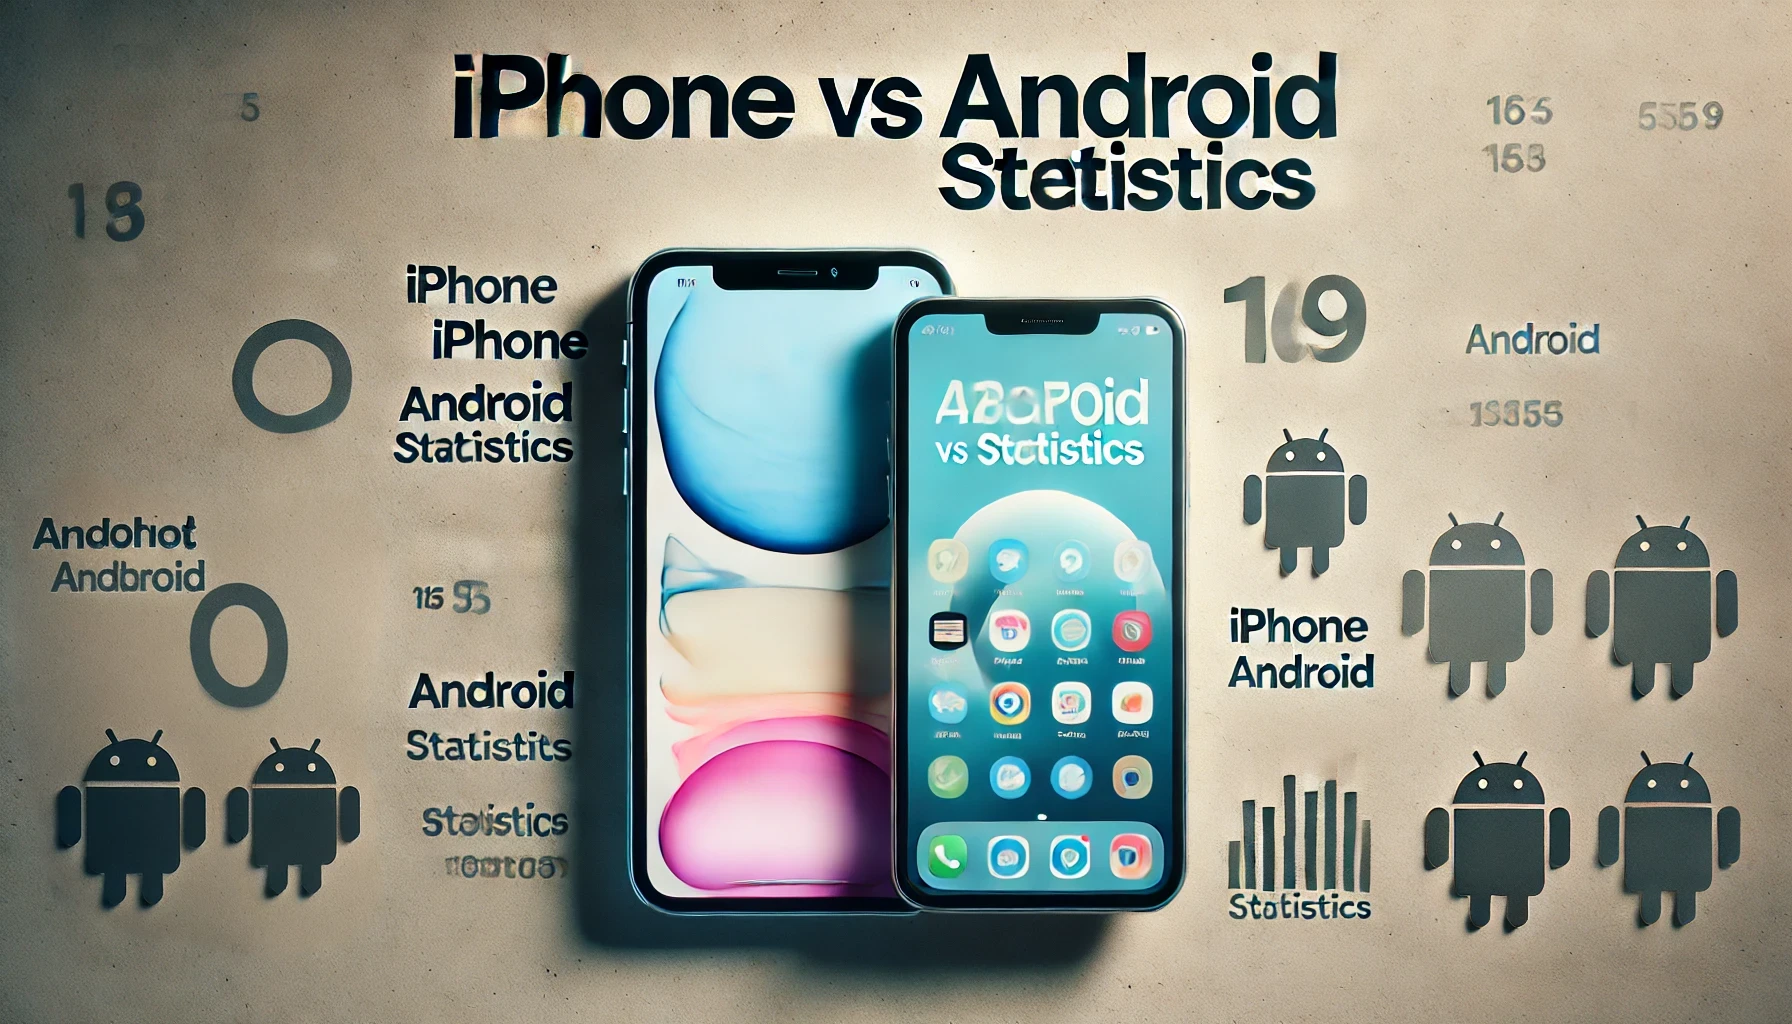 iPhone vs Android Statistics – Which Is Better?